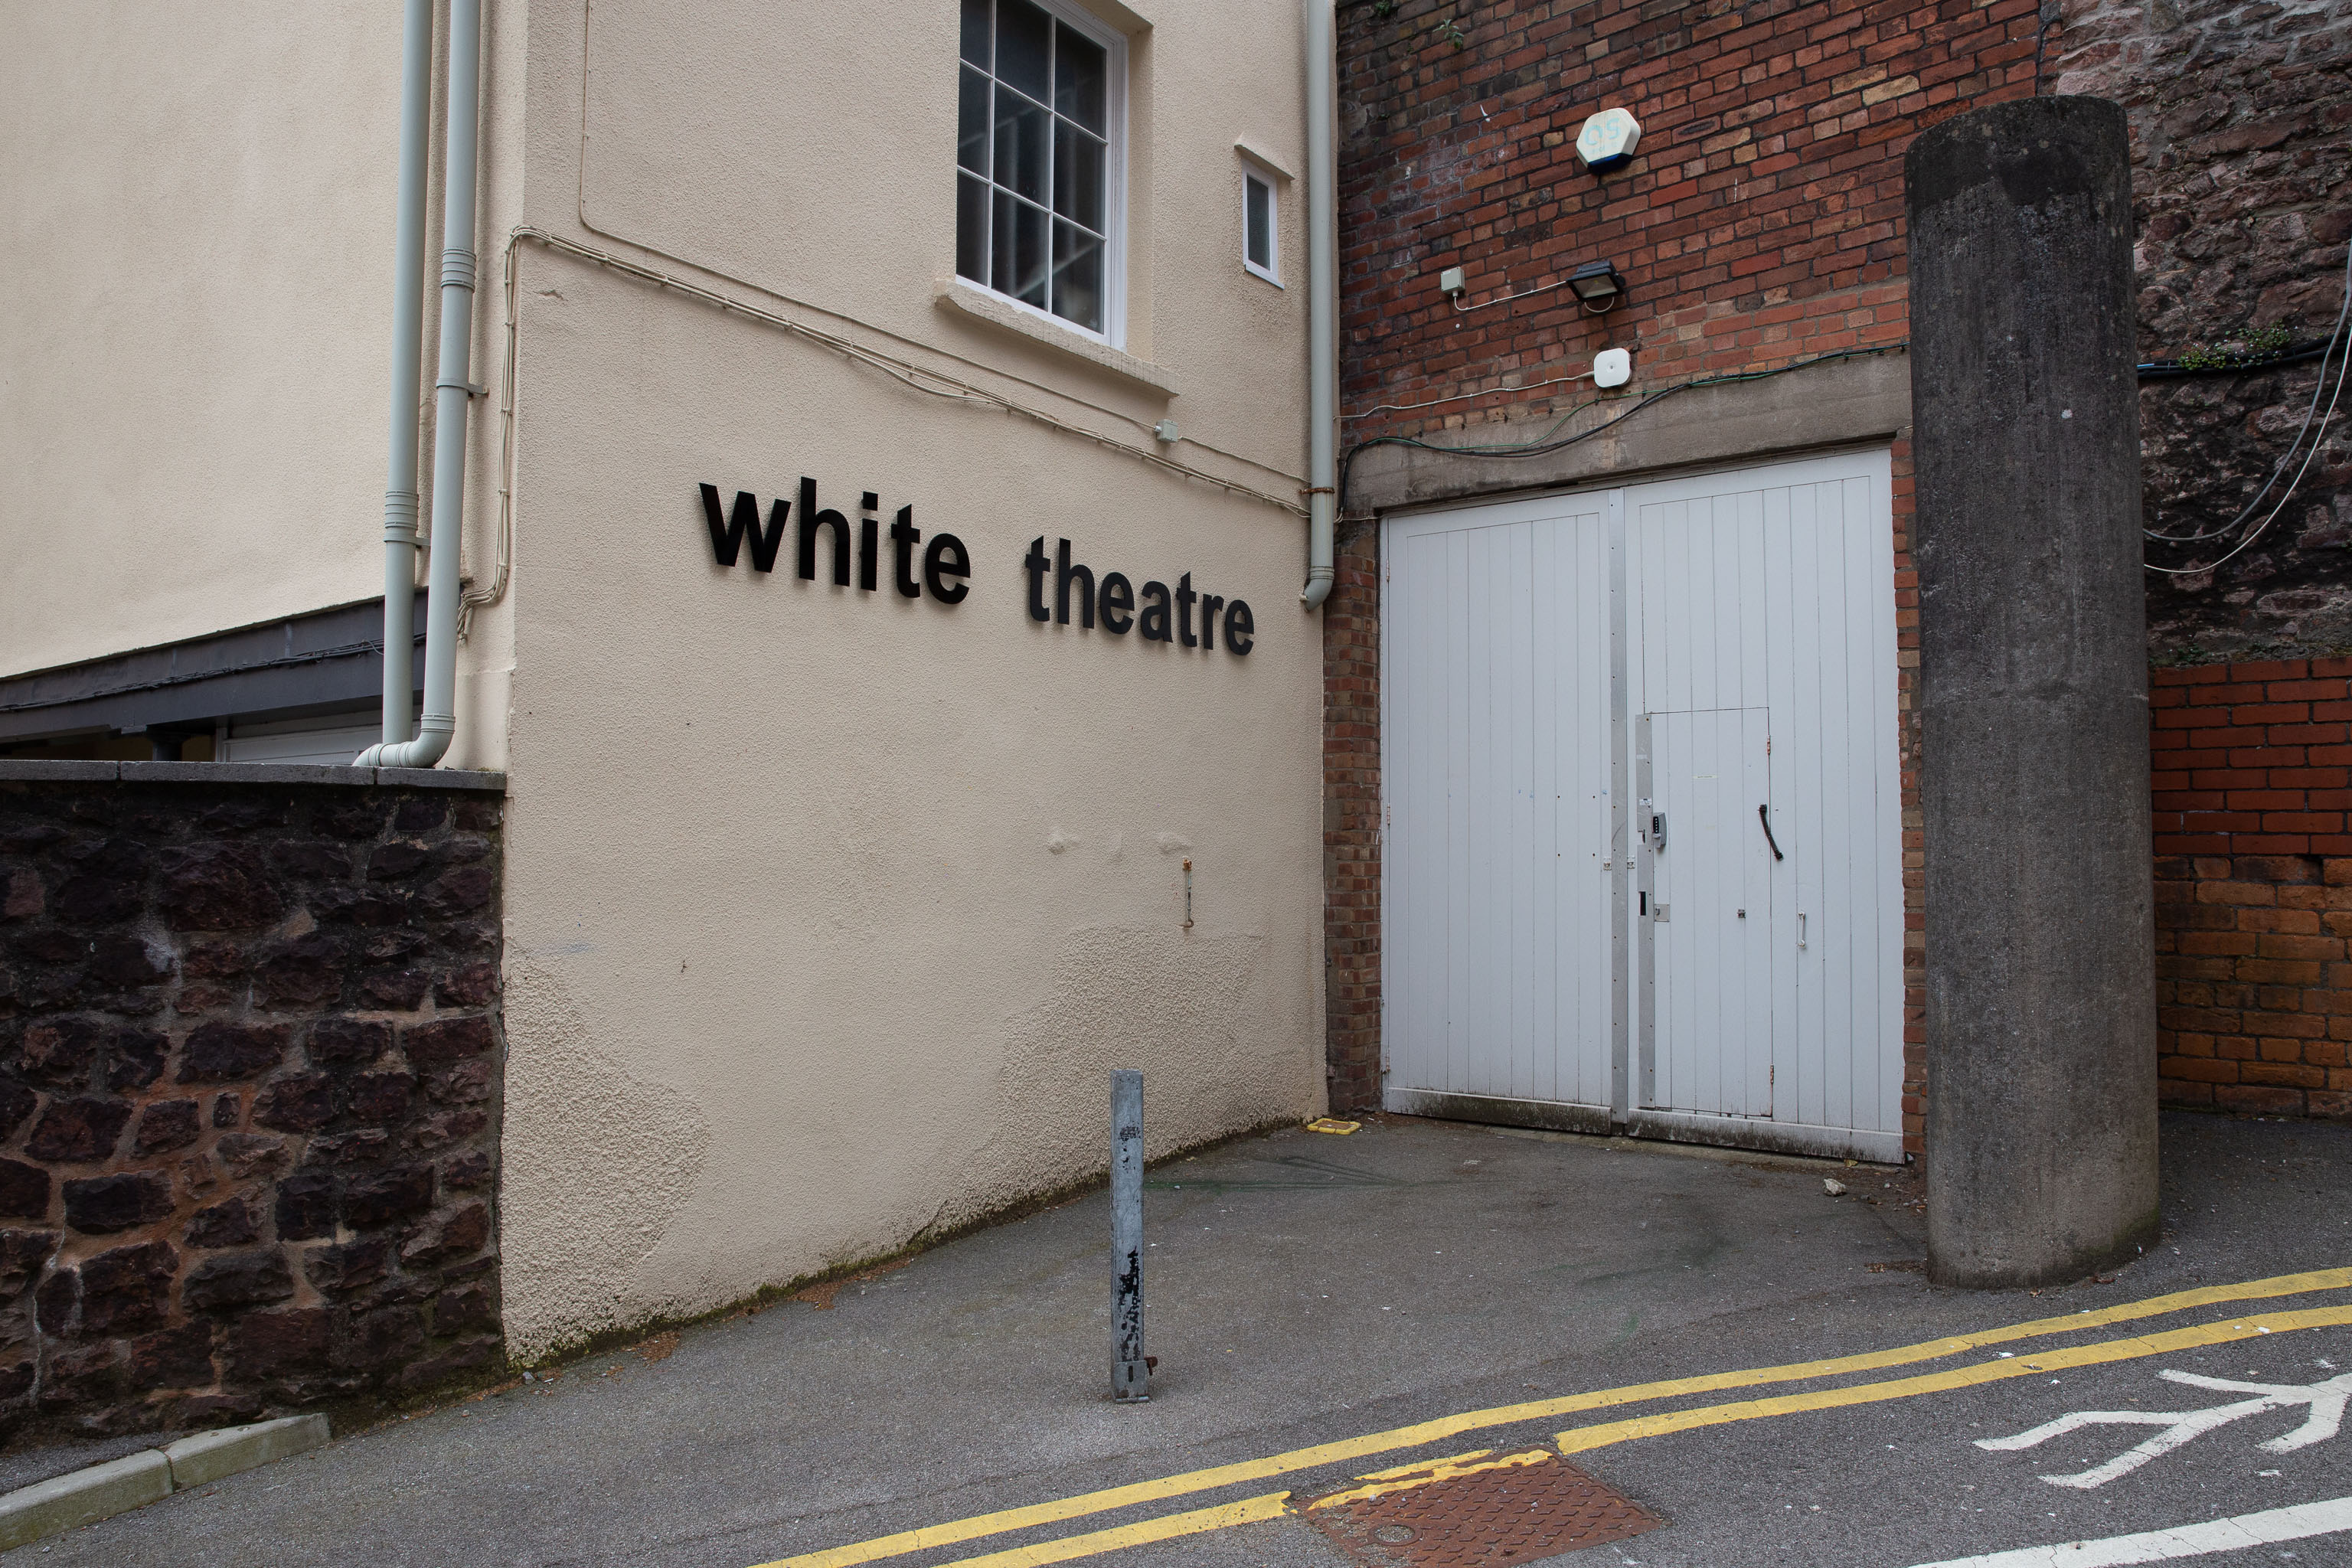 White Theatre
This is apparently a "smaller, adaptable studio space" connected with the University's adjacent Wickham Theatre.
